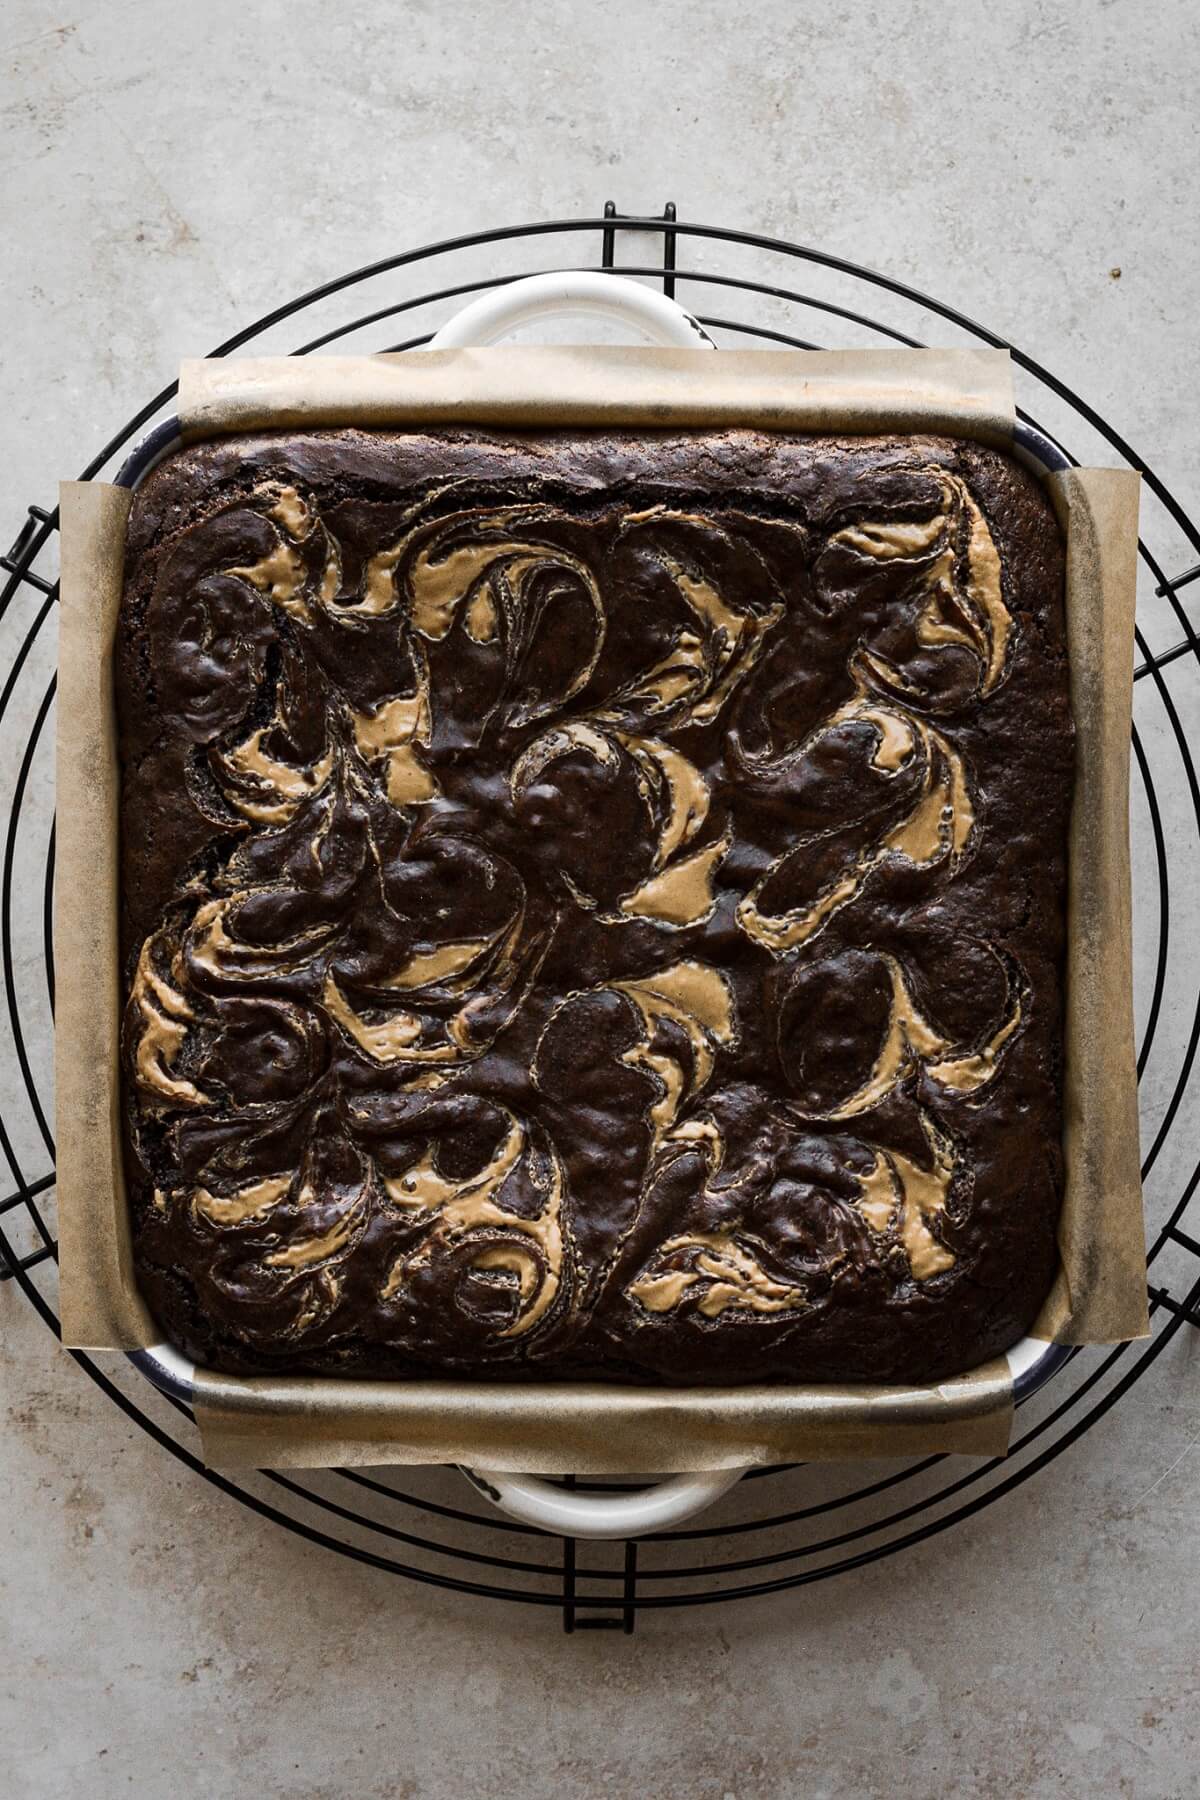 Step 7 for making peanut butter swirl brownies.